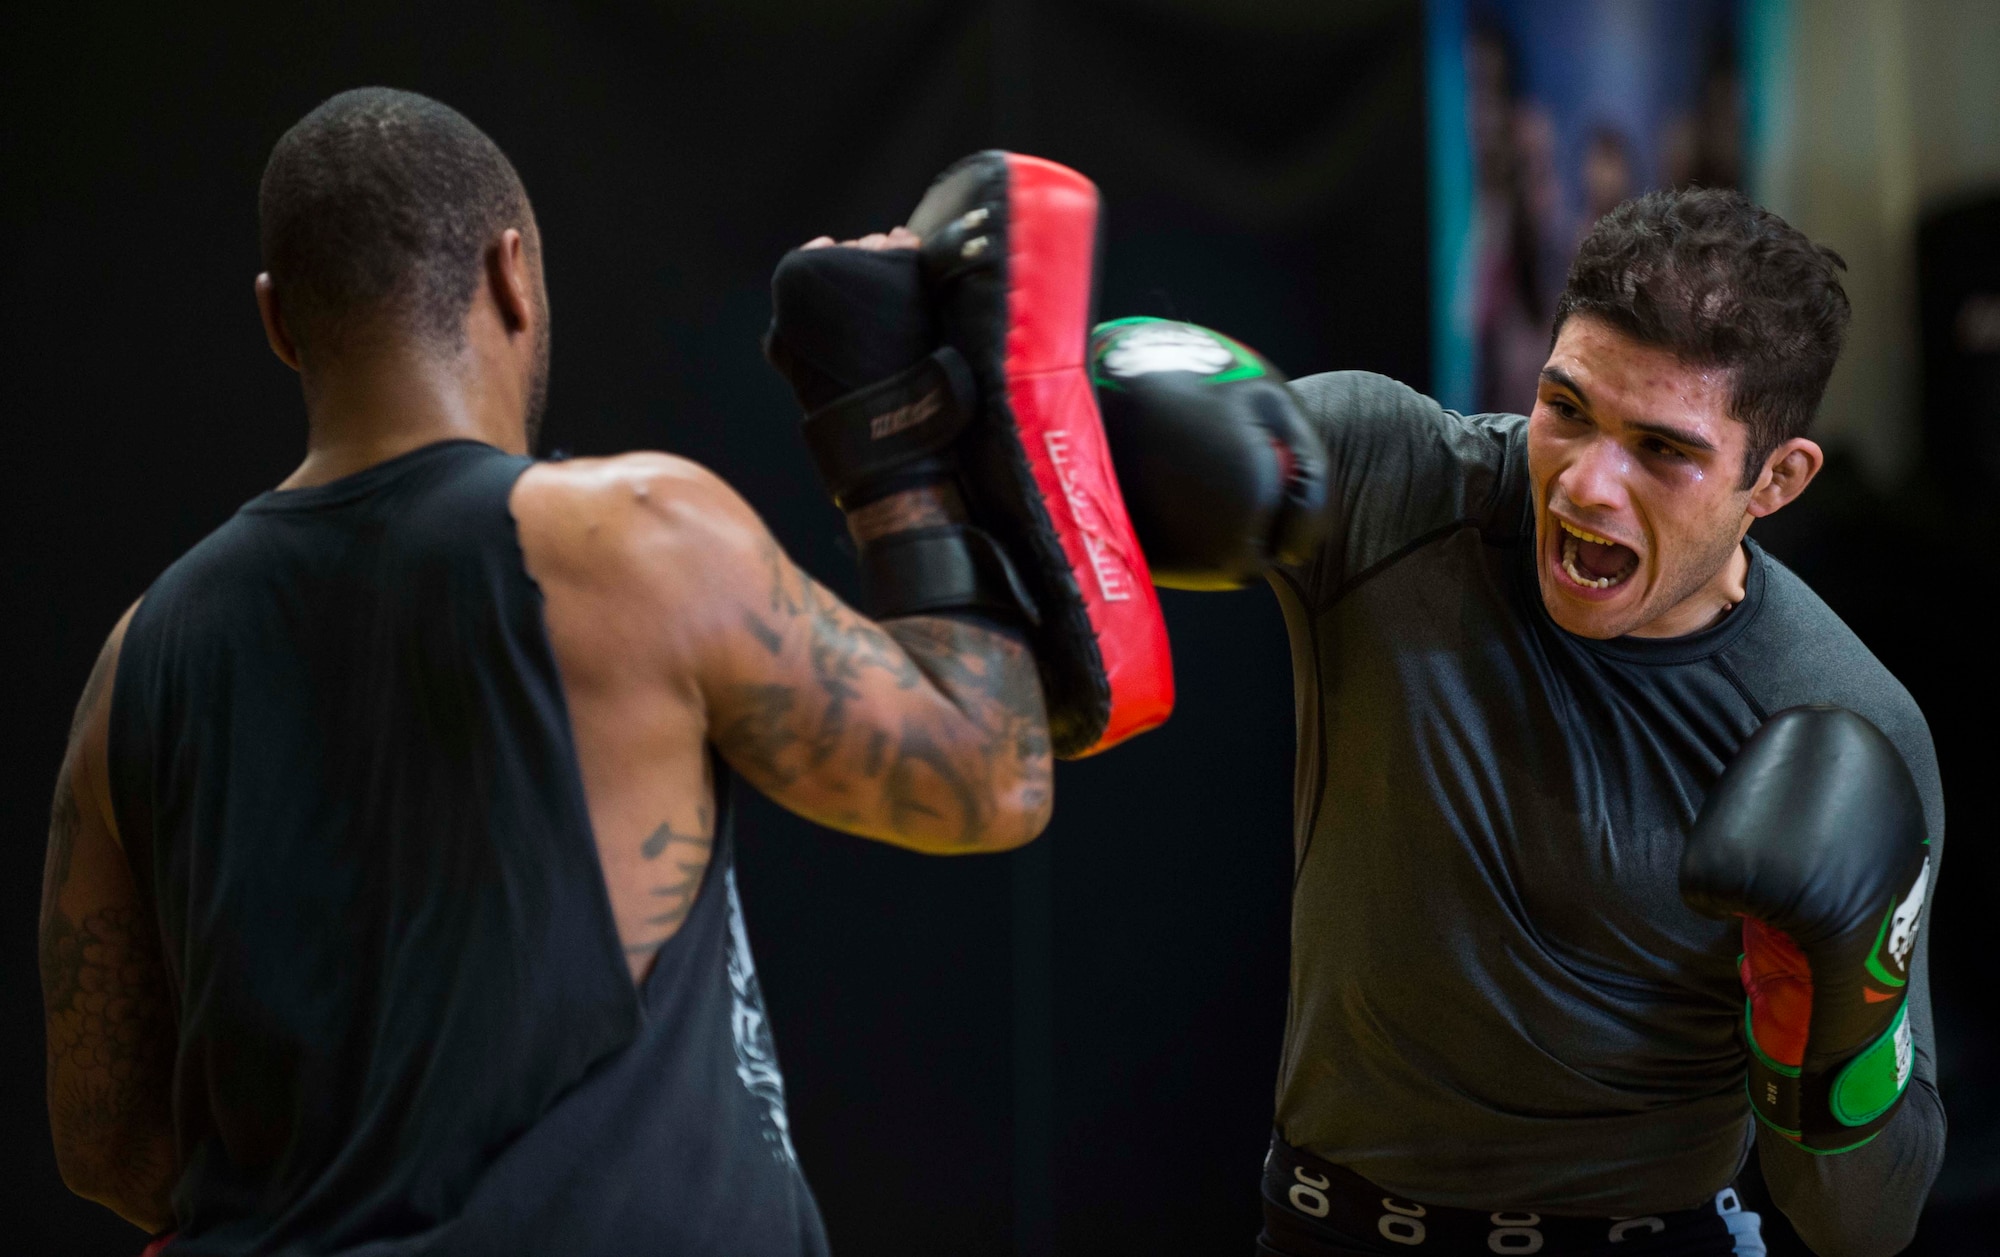 Airman 1st Class Raul Veliz, 90th Missile Security Forces Squadron response force leader, throws punches during practice at Trials Mixed Martial Arts gym in Fort Collins Colo., May 5, 2017. Veliz has been fighting MMA for almost two years. He is stationed at F.E. Warren Air Force Base, Wyo. (U.S. Air Force photo by Staff Sgt. Christopher Ruano)